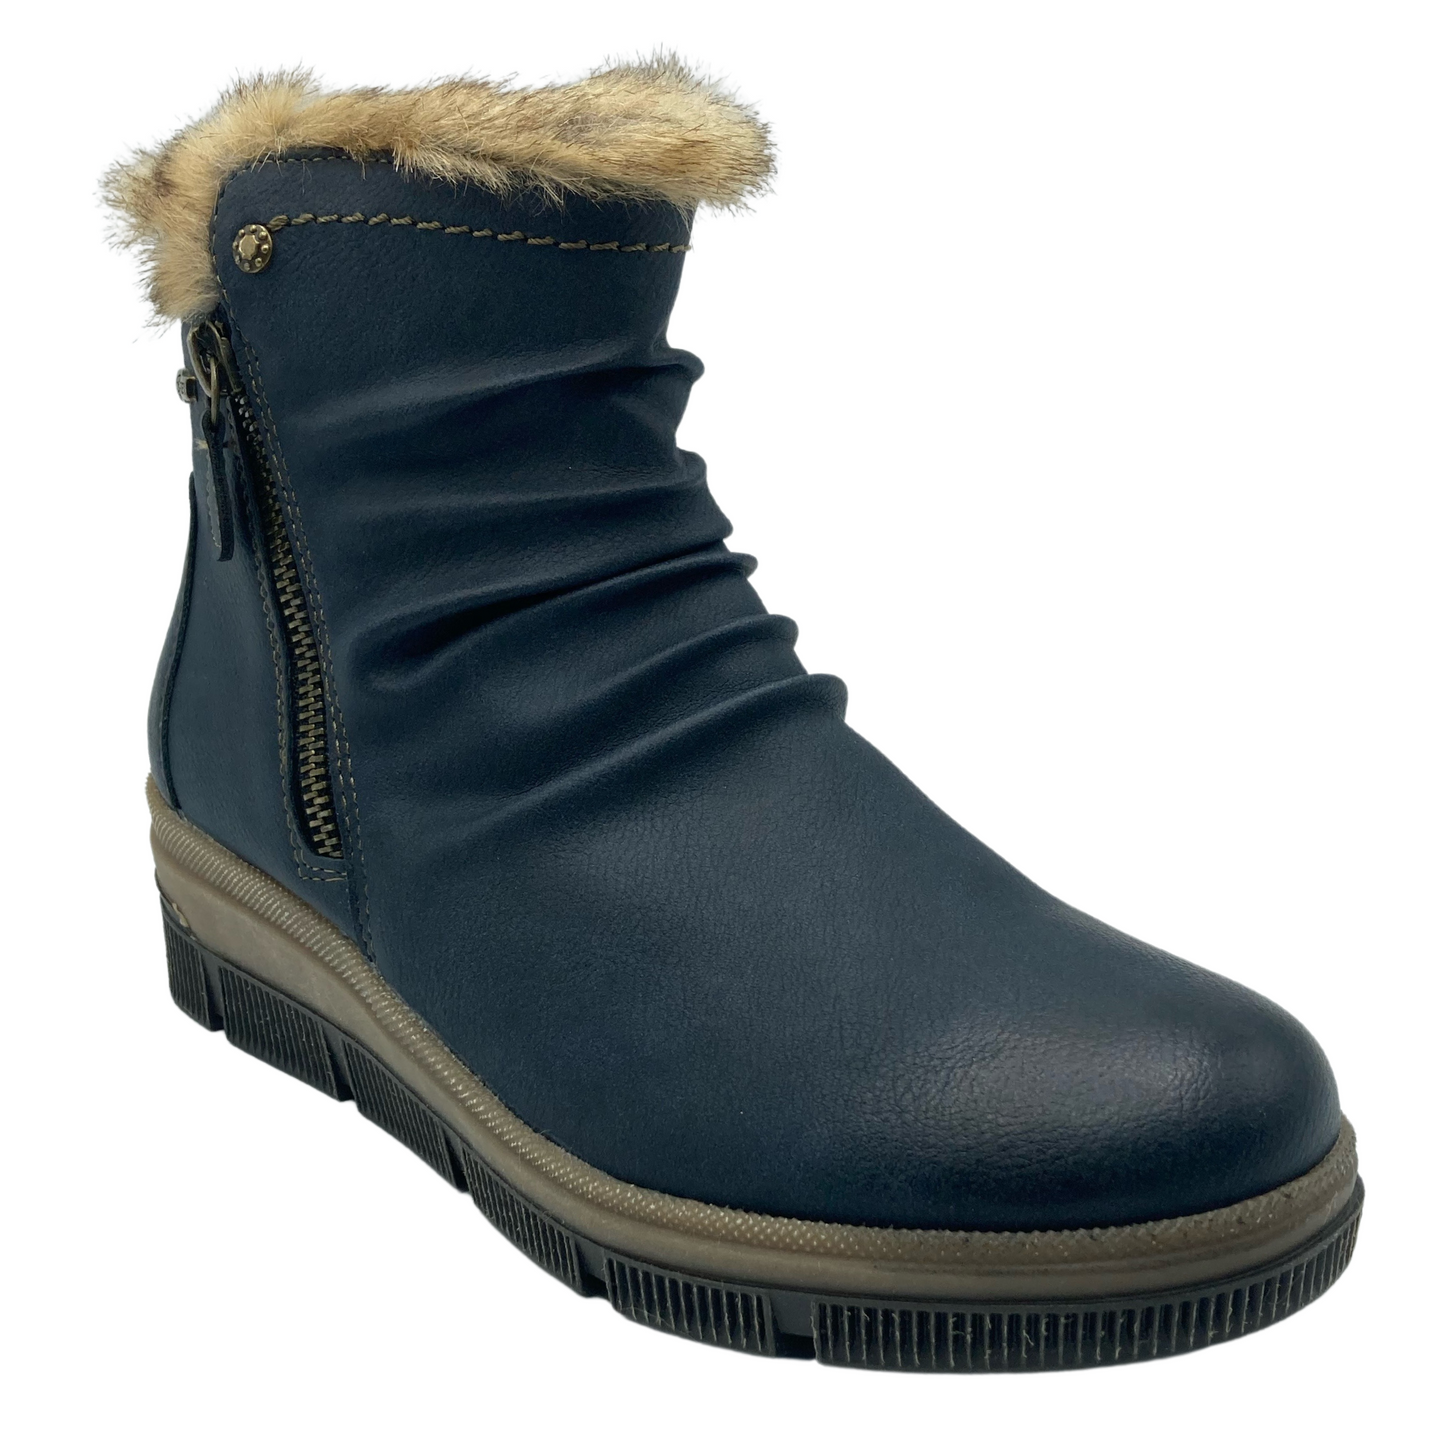 45 degree angled view of blue, vegan leather bootie with brown faux fur lining and rubber outsole